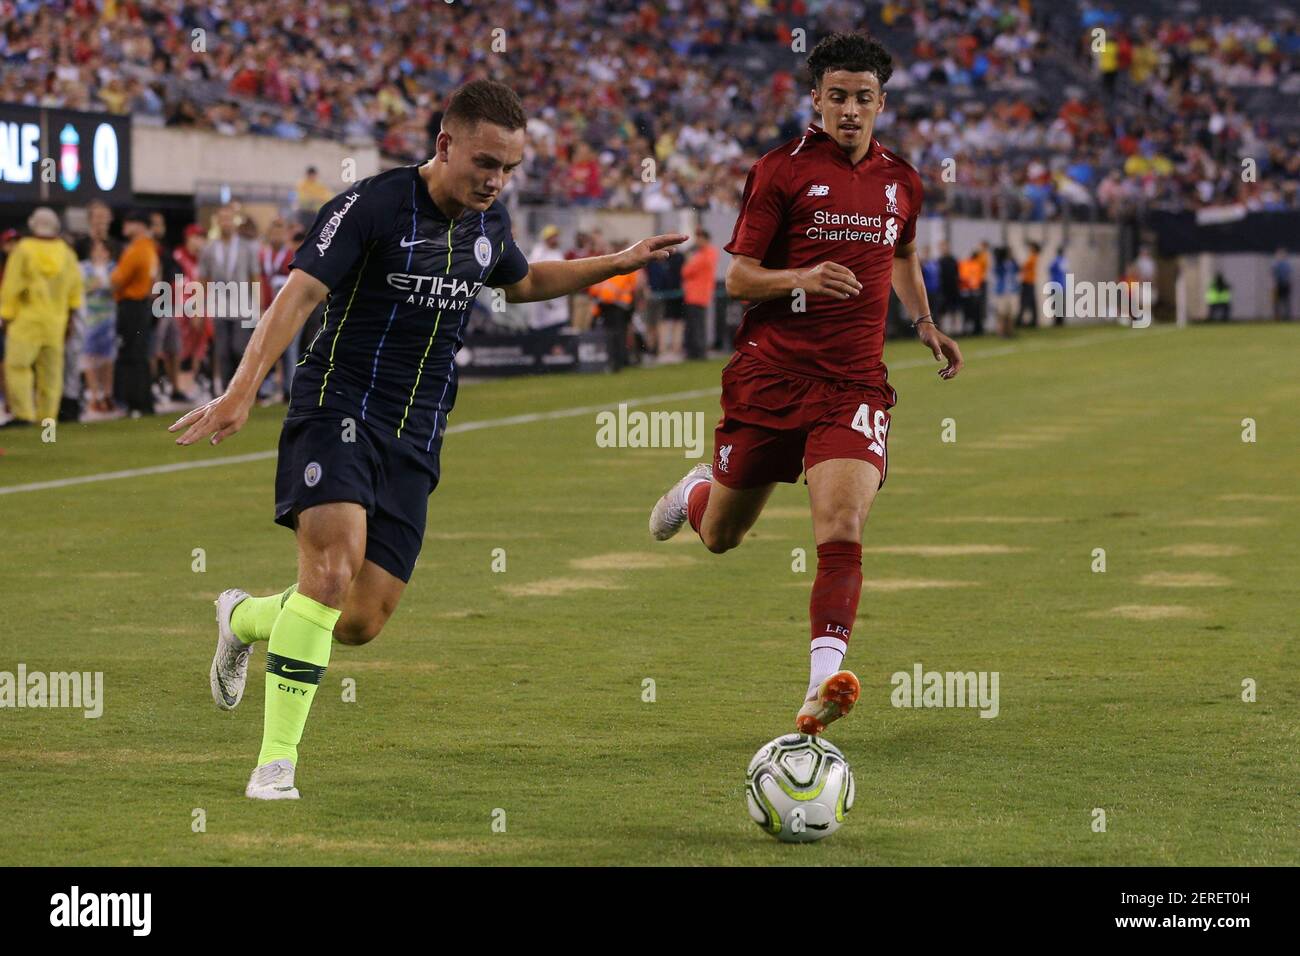 Jul 25, 2018; East Rutherford, NJ, USA; Manchester City forward Luke Bolton (74) and Liverpool midfielder Curtis Jones (48) fight for the ball during the first half of an International Champions Cup soccer match at MetLife Stadium. Mandatory Credit: Brad Penner-USA TODAY Sports Stock Photo